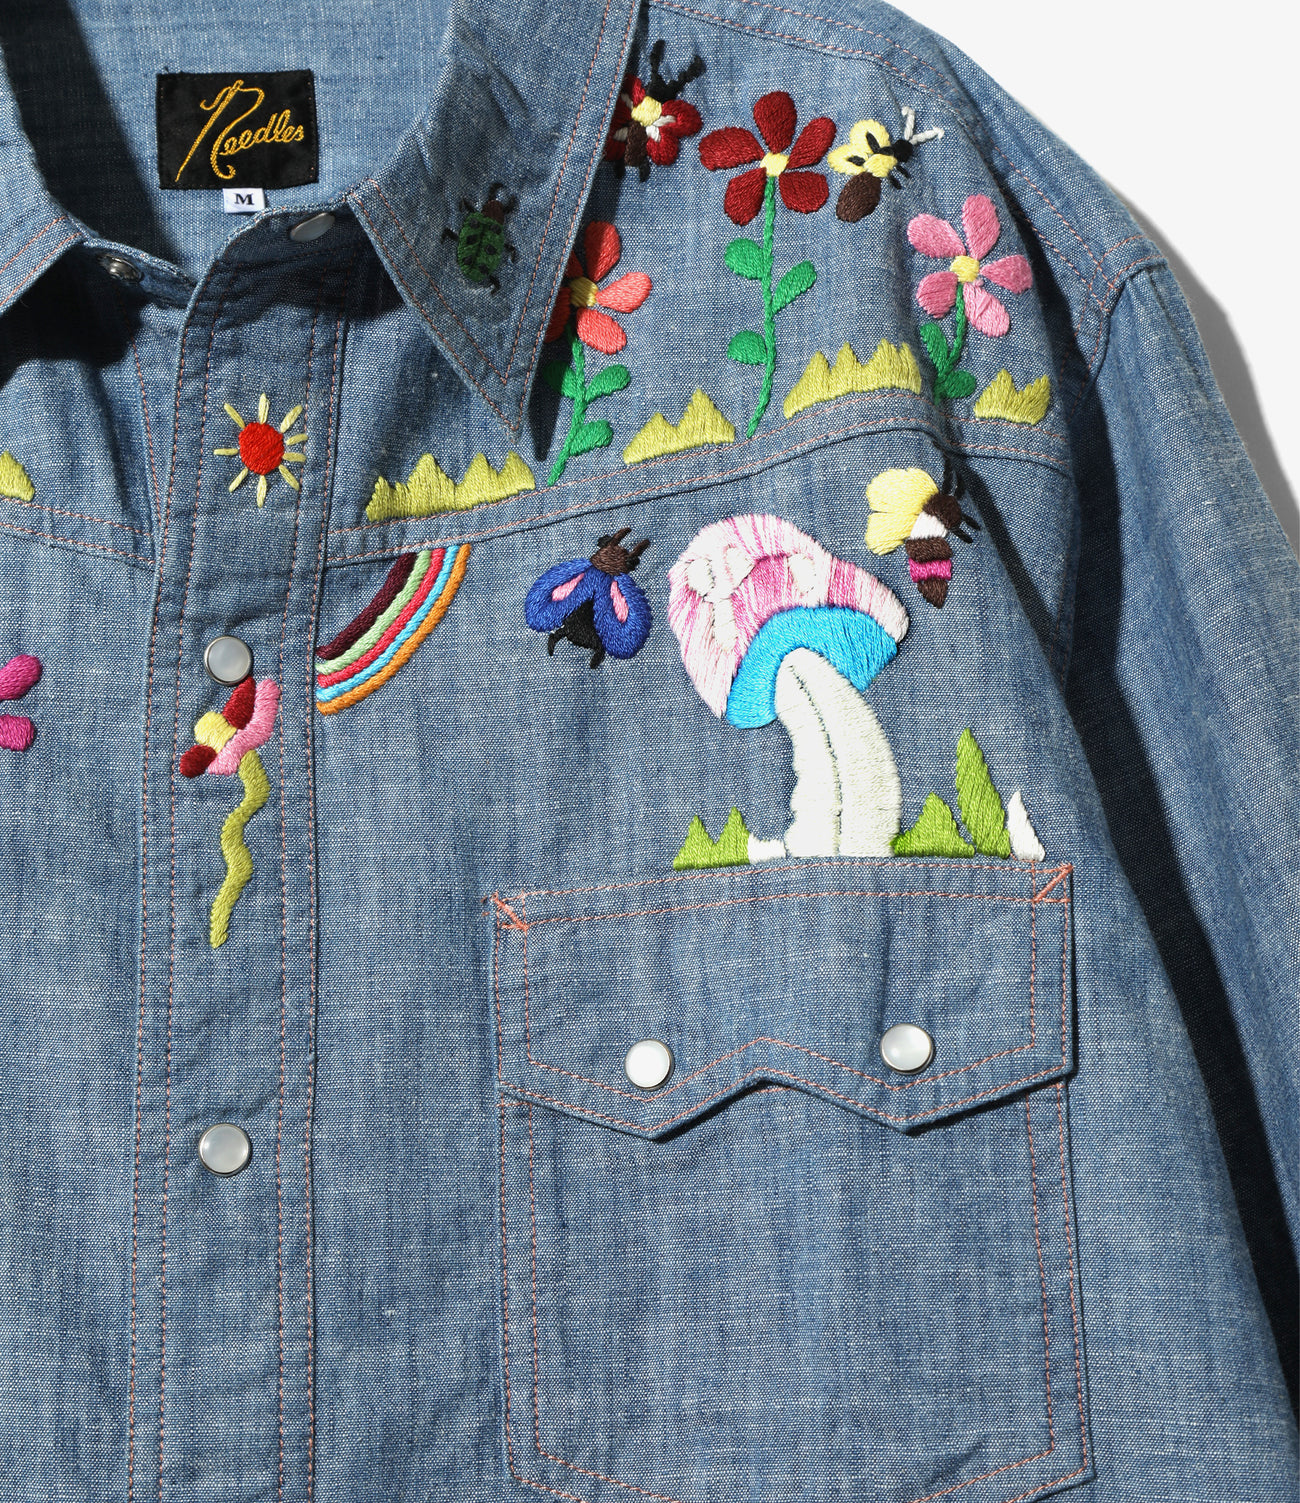 Western Shirt - Cotton Chambray / India Emb. – NEPENTHES ONLINE STORE